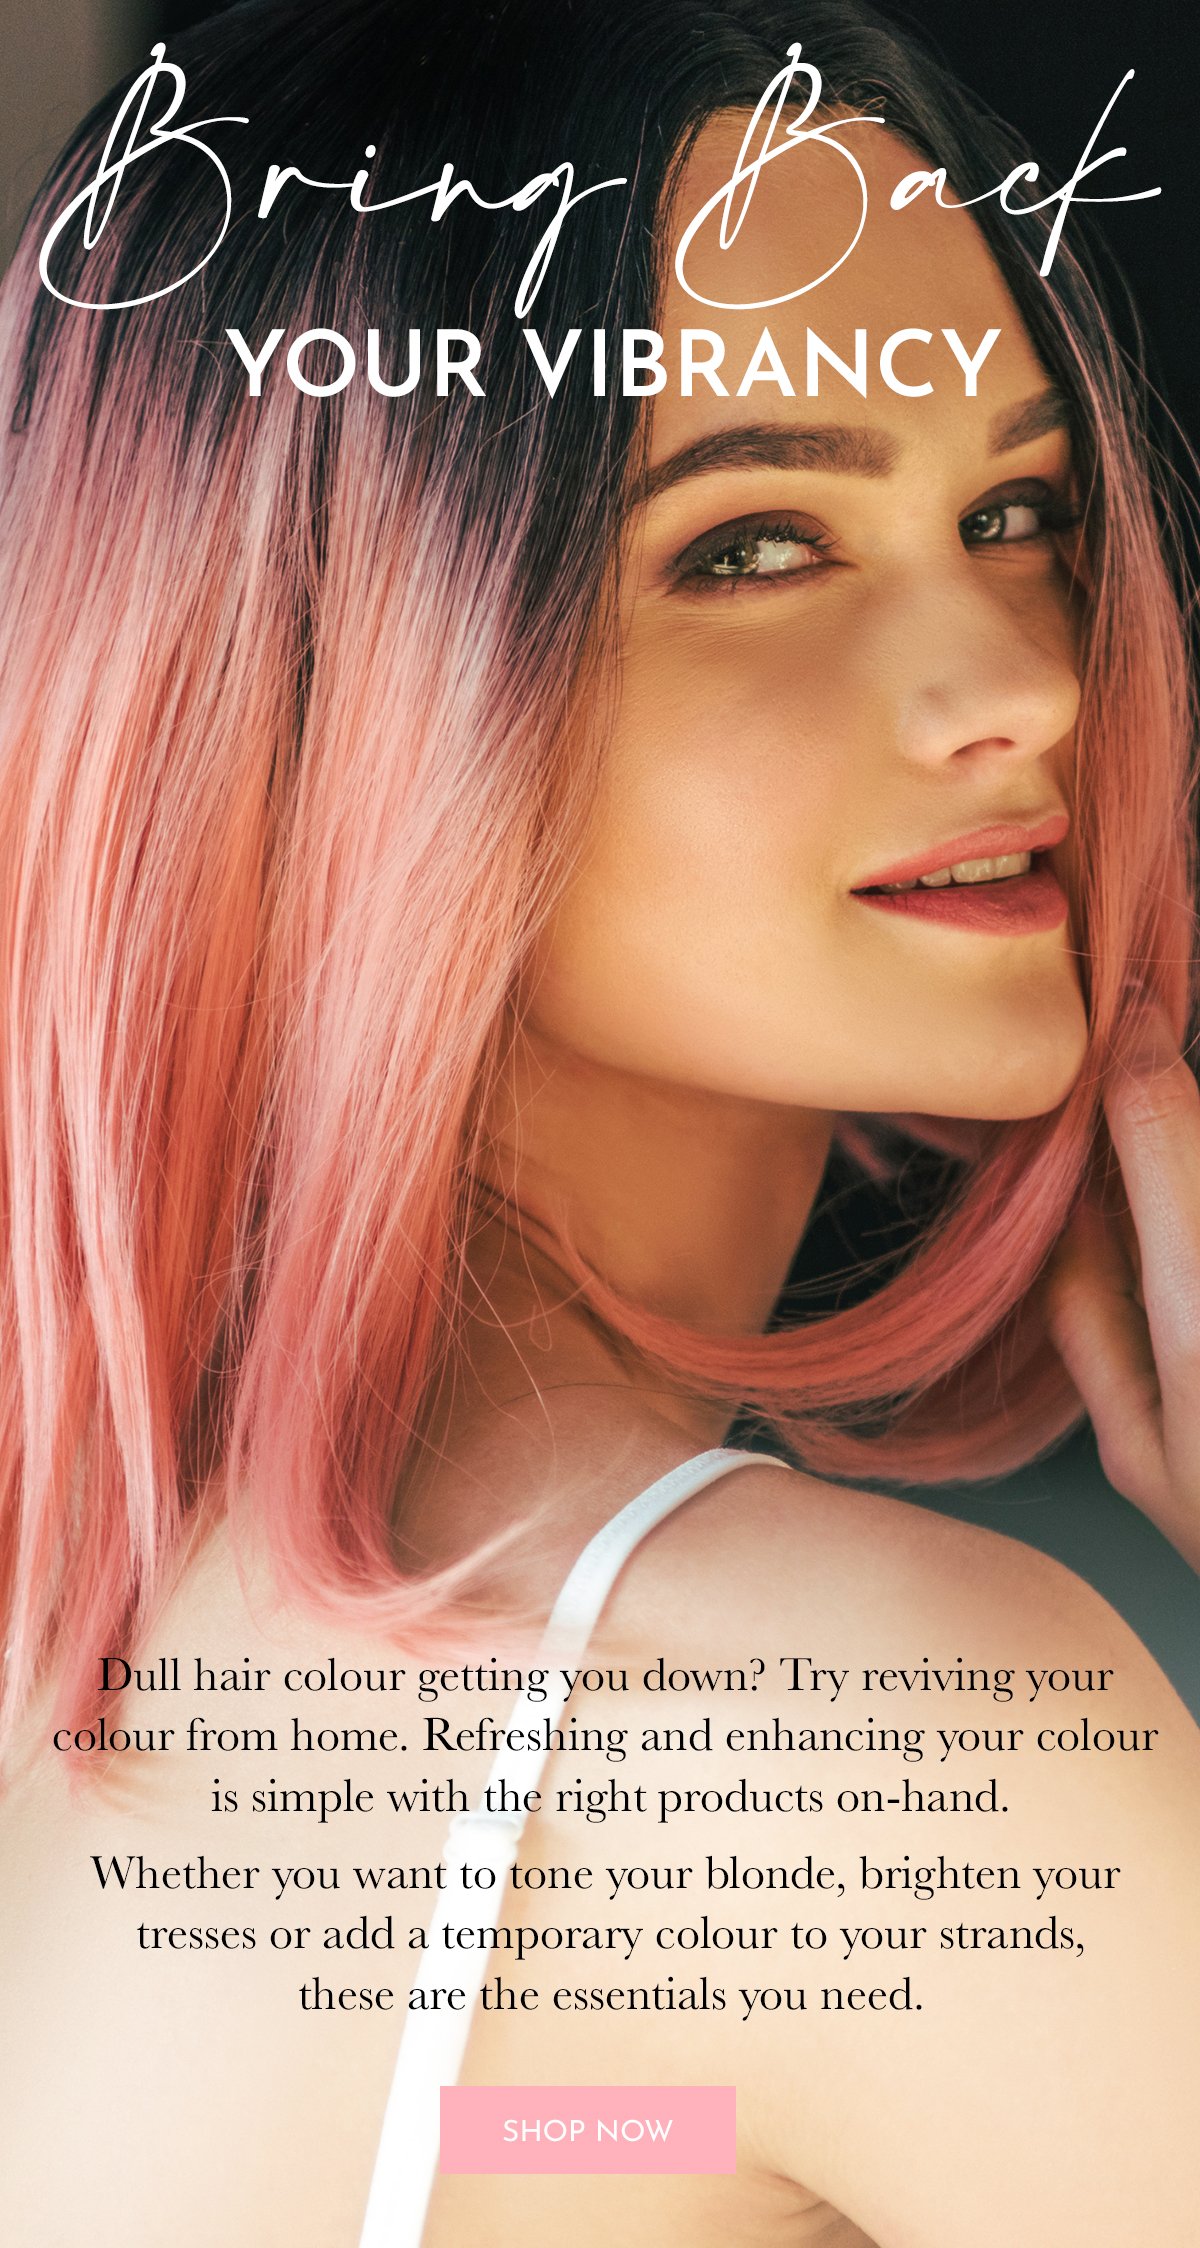 Beautopia Hair & Beauty: Dull Hair Colour Getting You Down? | Milled